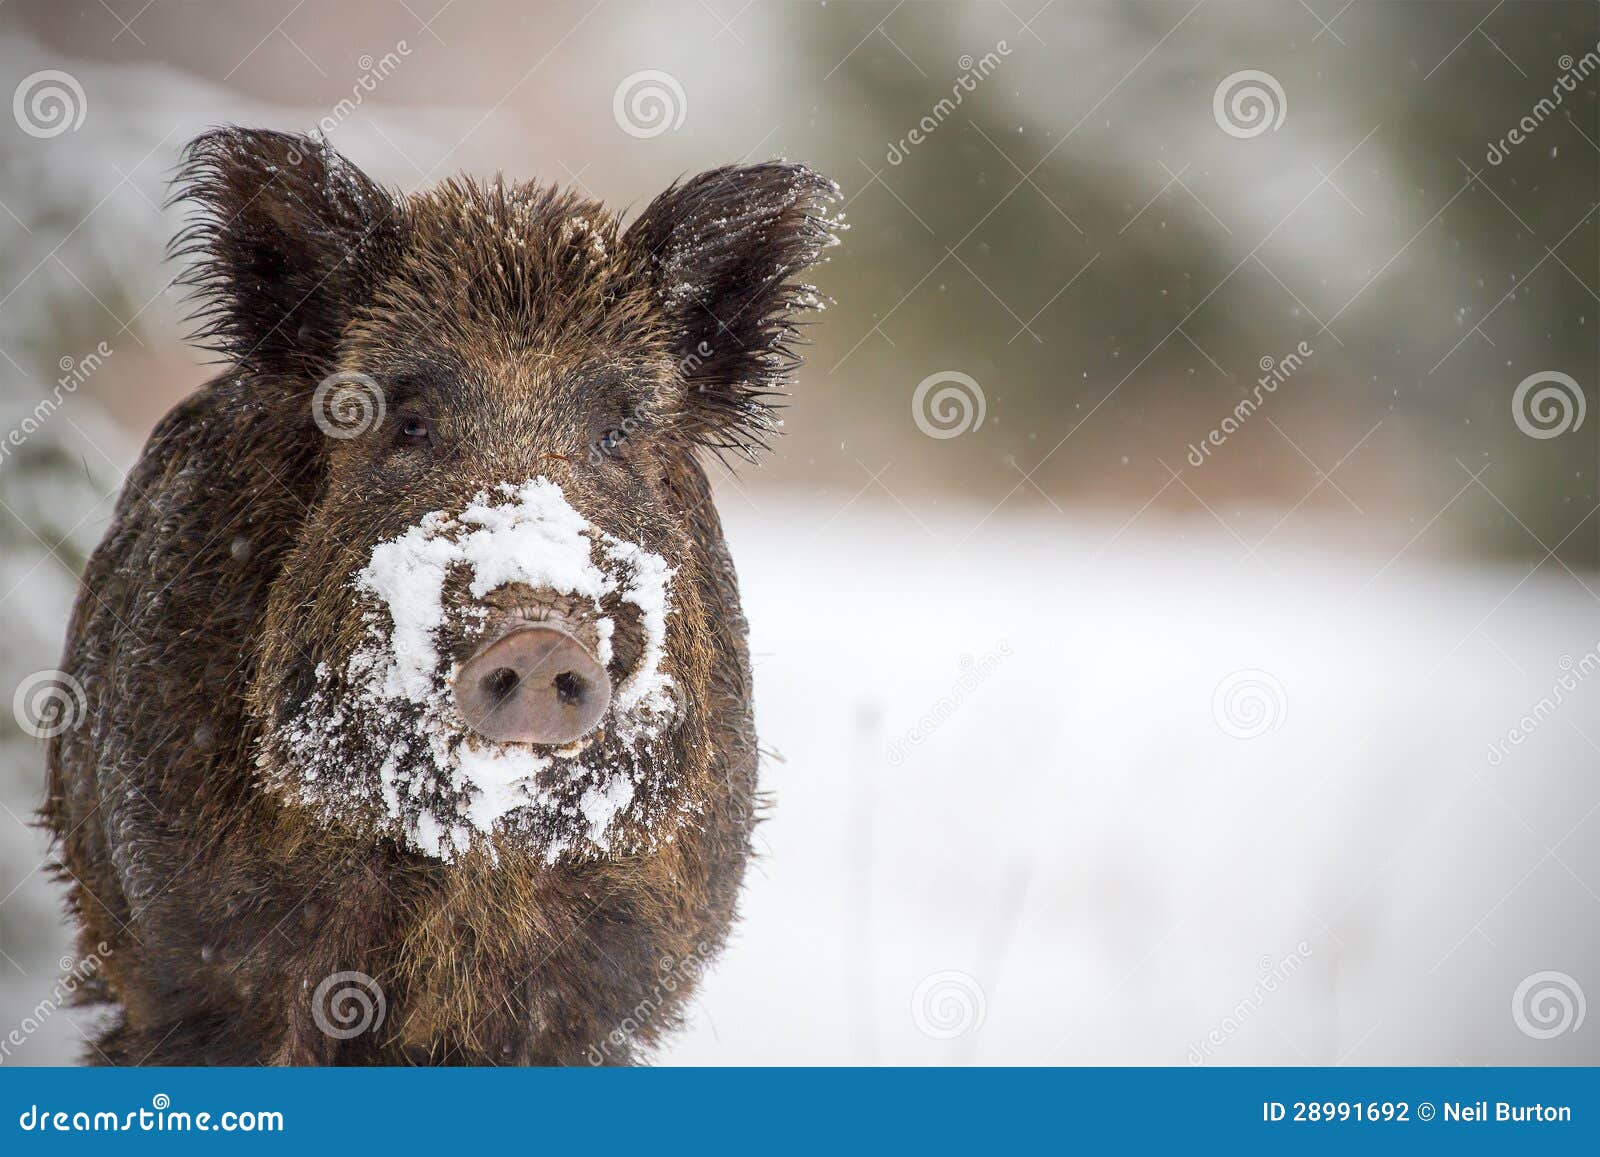 wild boar with snow on snout